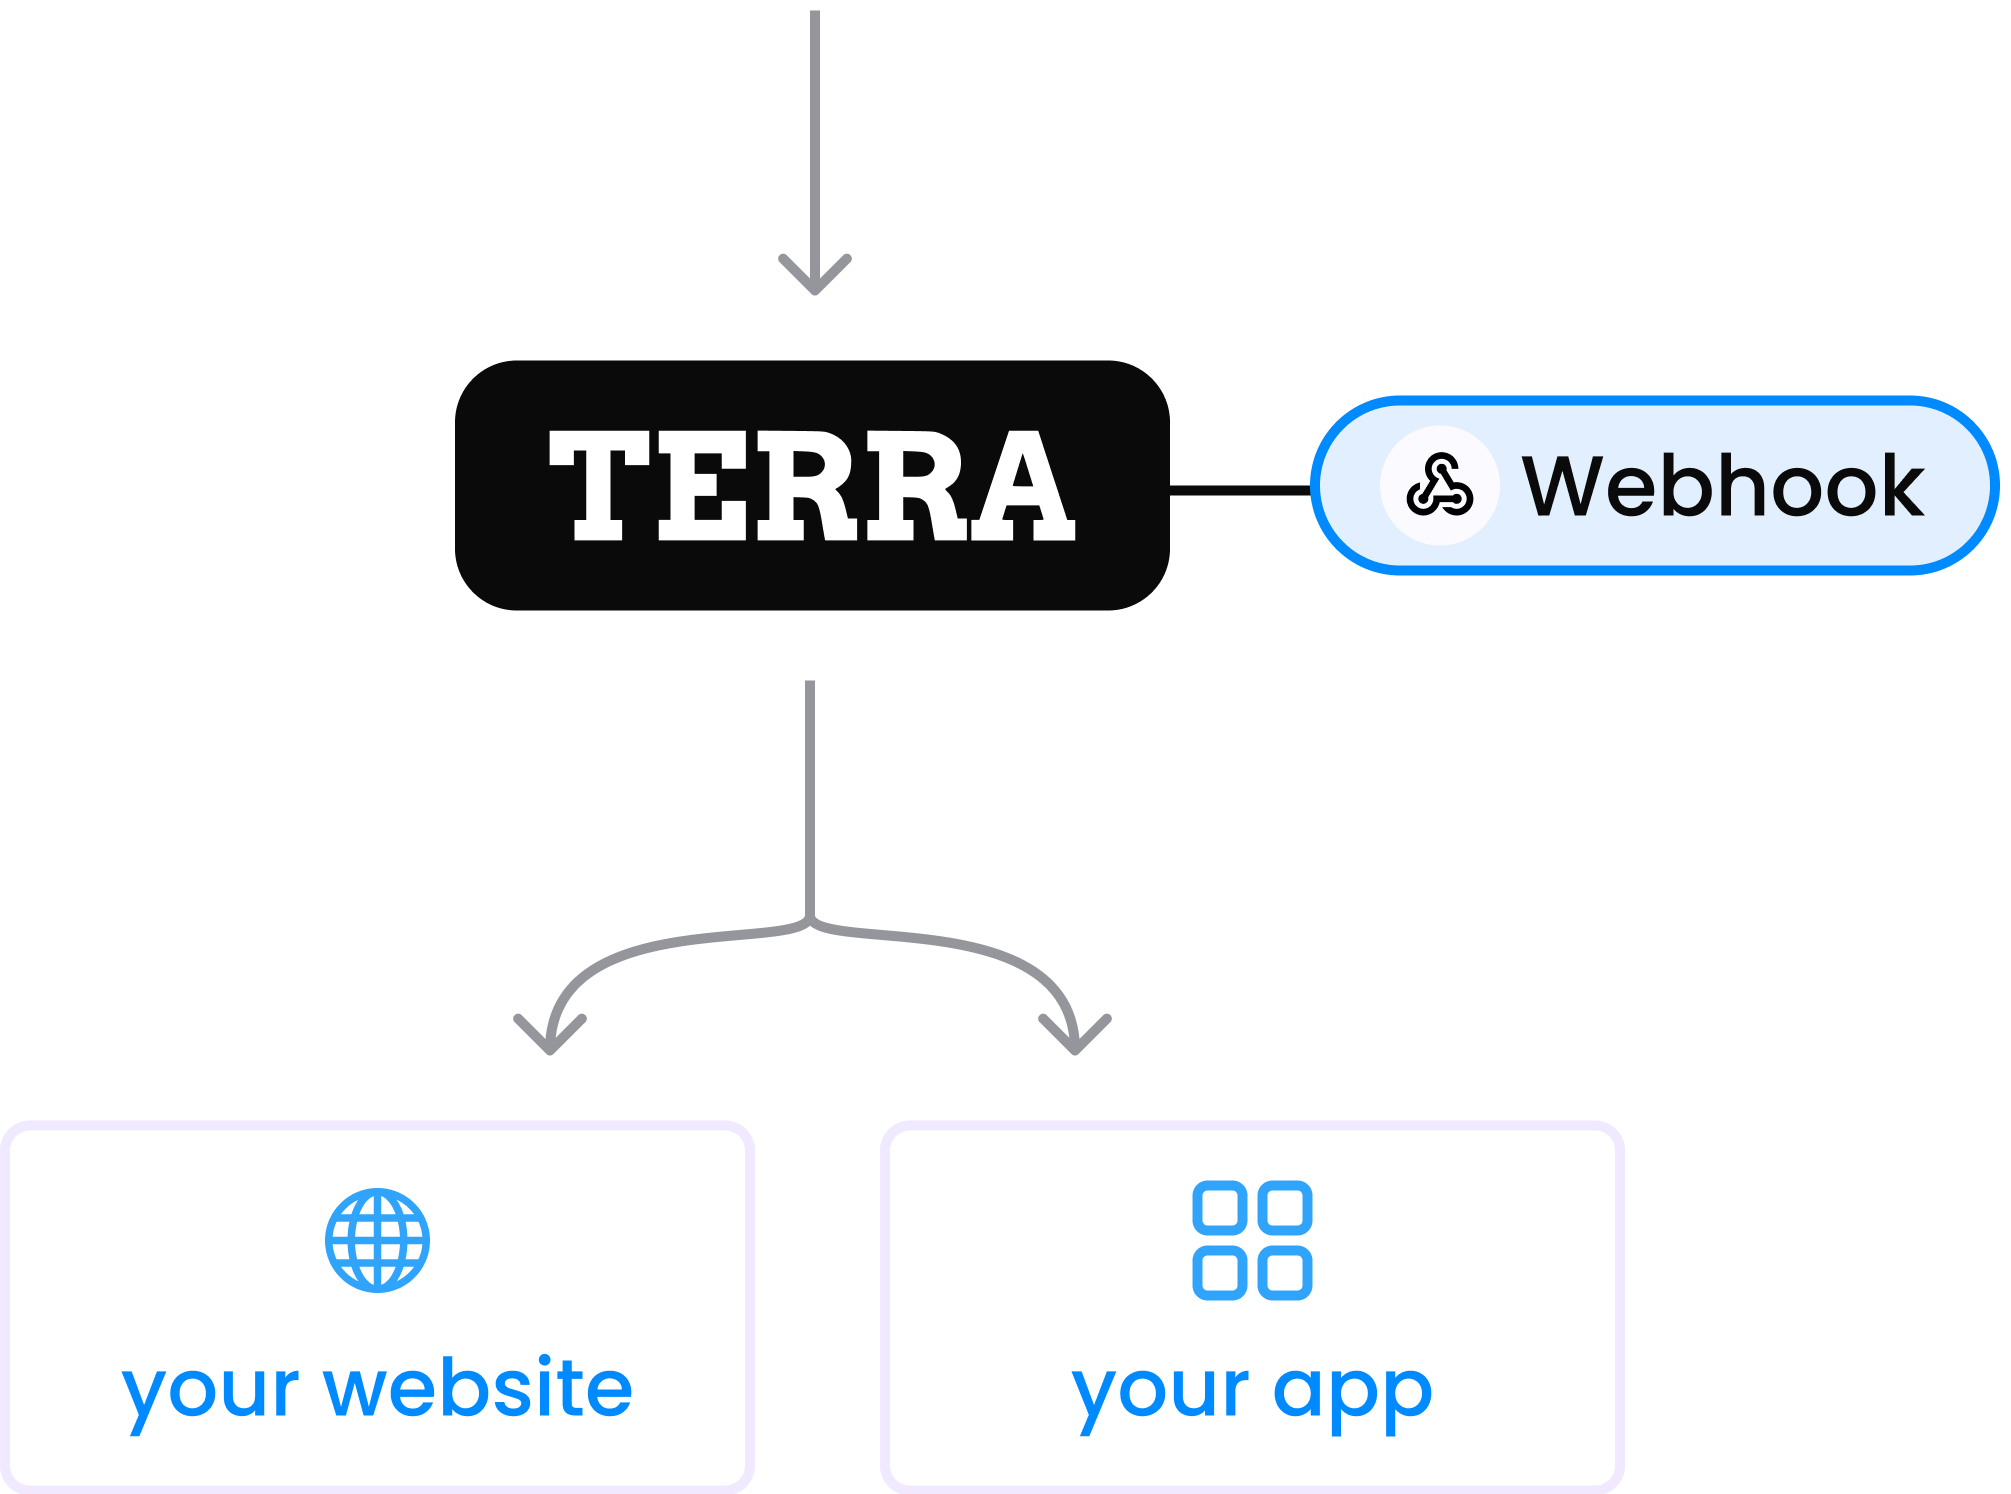 receiving data from tredict integration via webhooks to your app or website